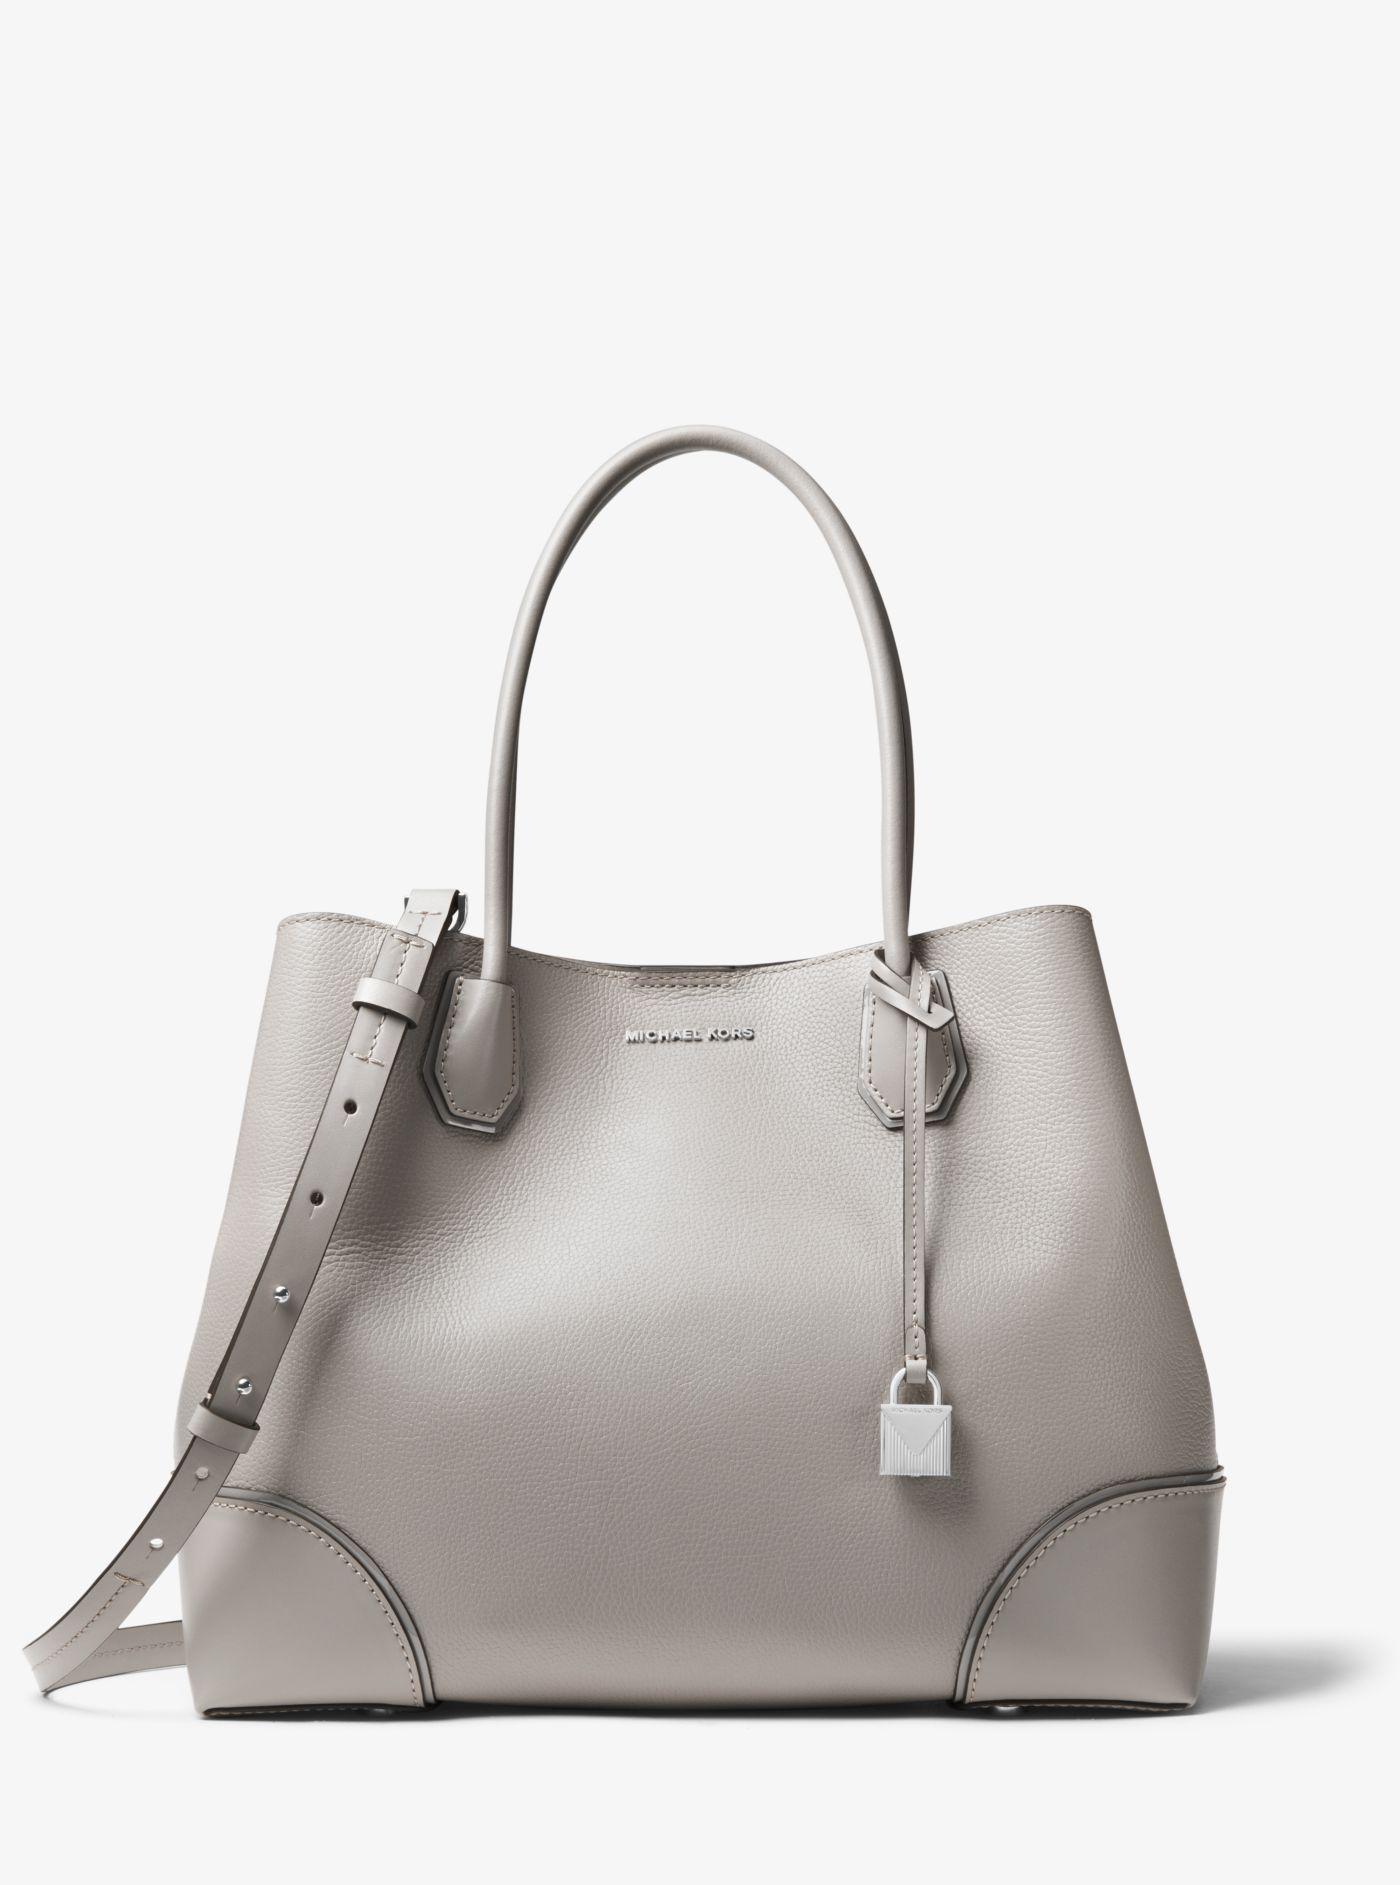 Michael Kors Mercer Gallery Large Pebbled Leather Satchel in Pearl Grey  (Gray) | Lyst